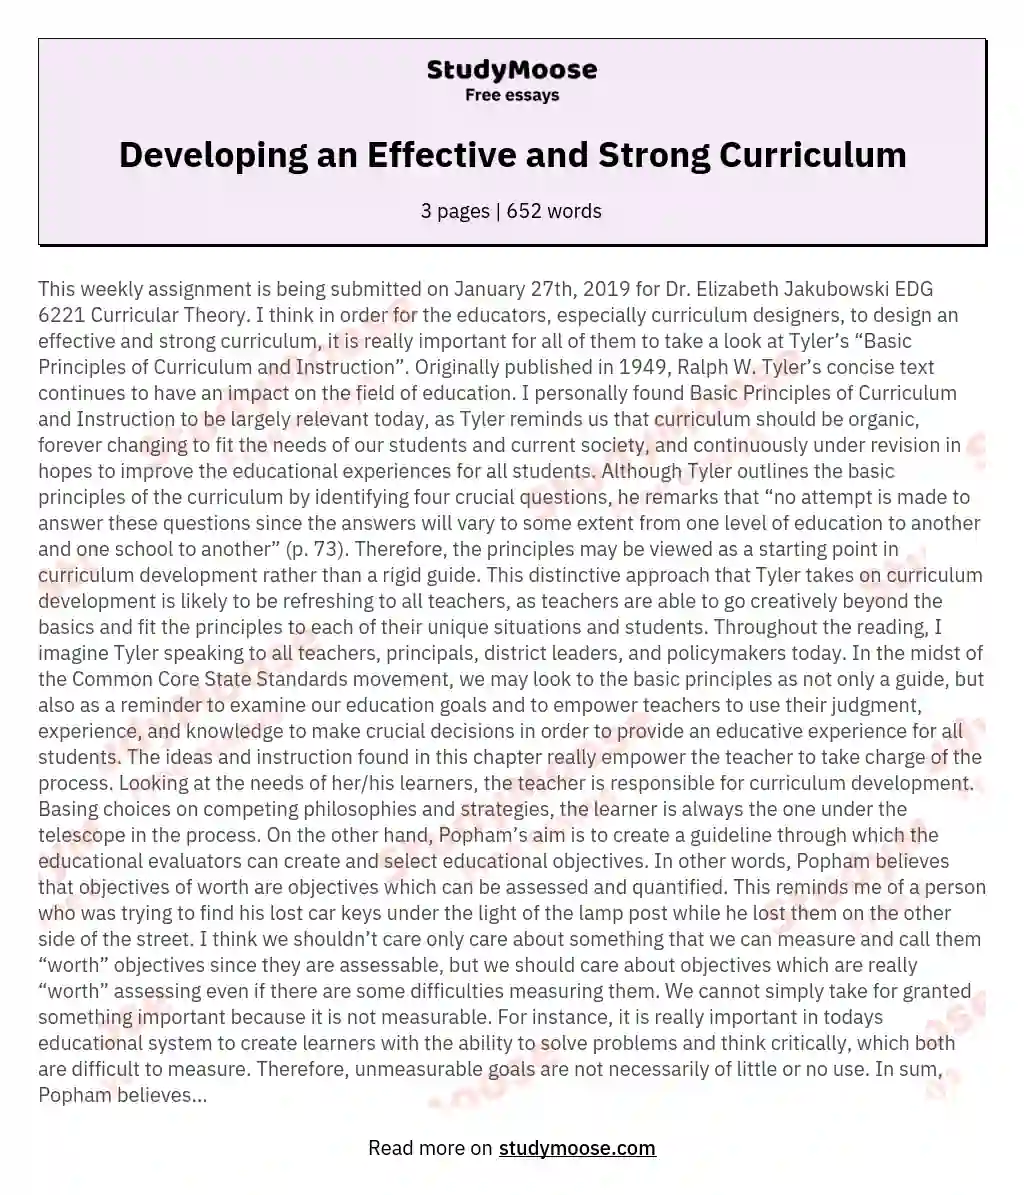 Developing an Effective and Strong Curriculum essay